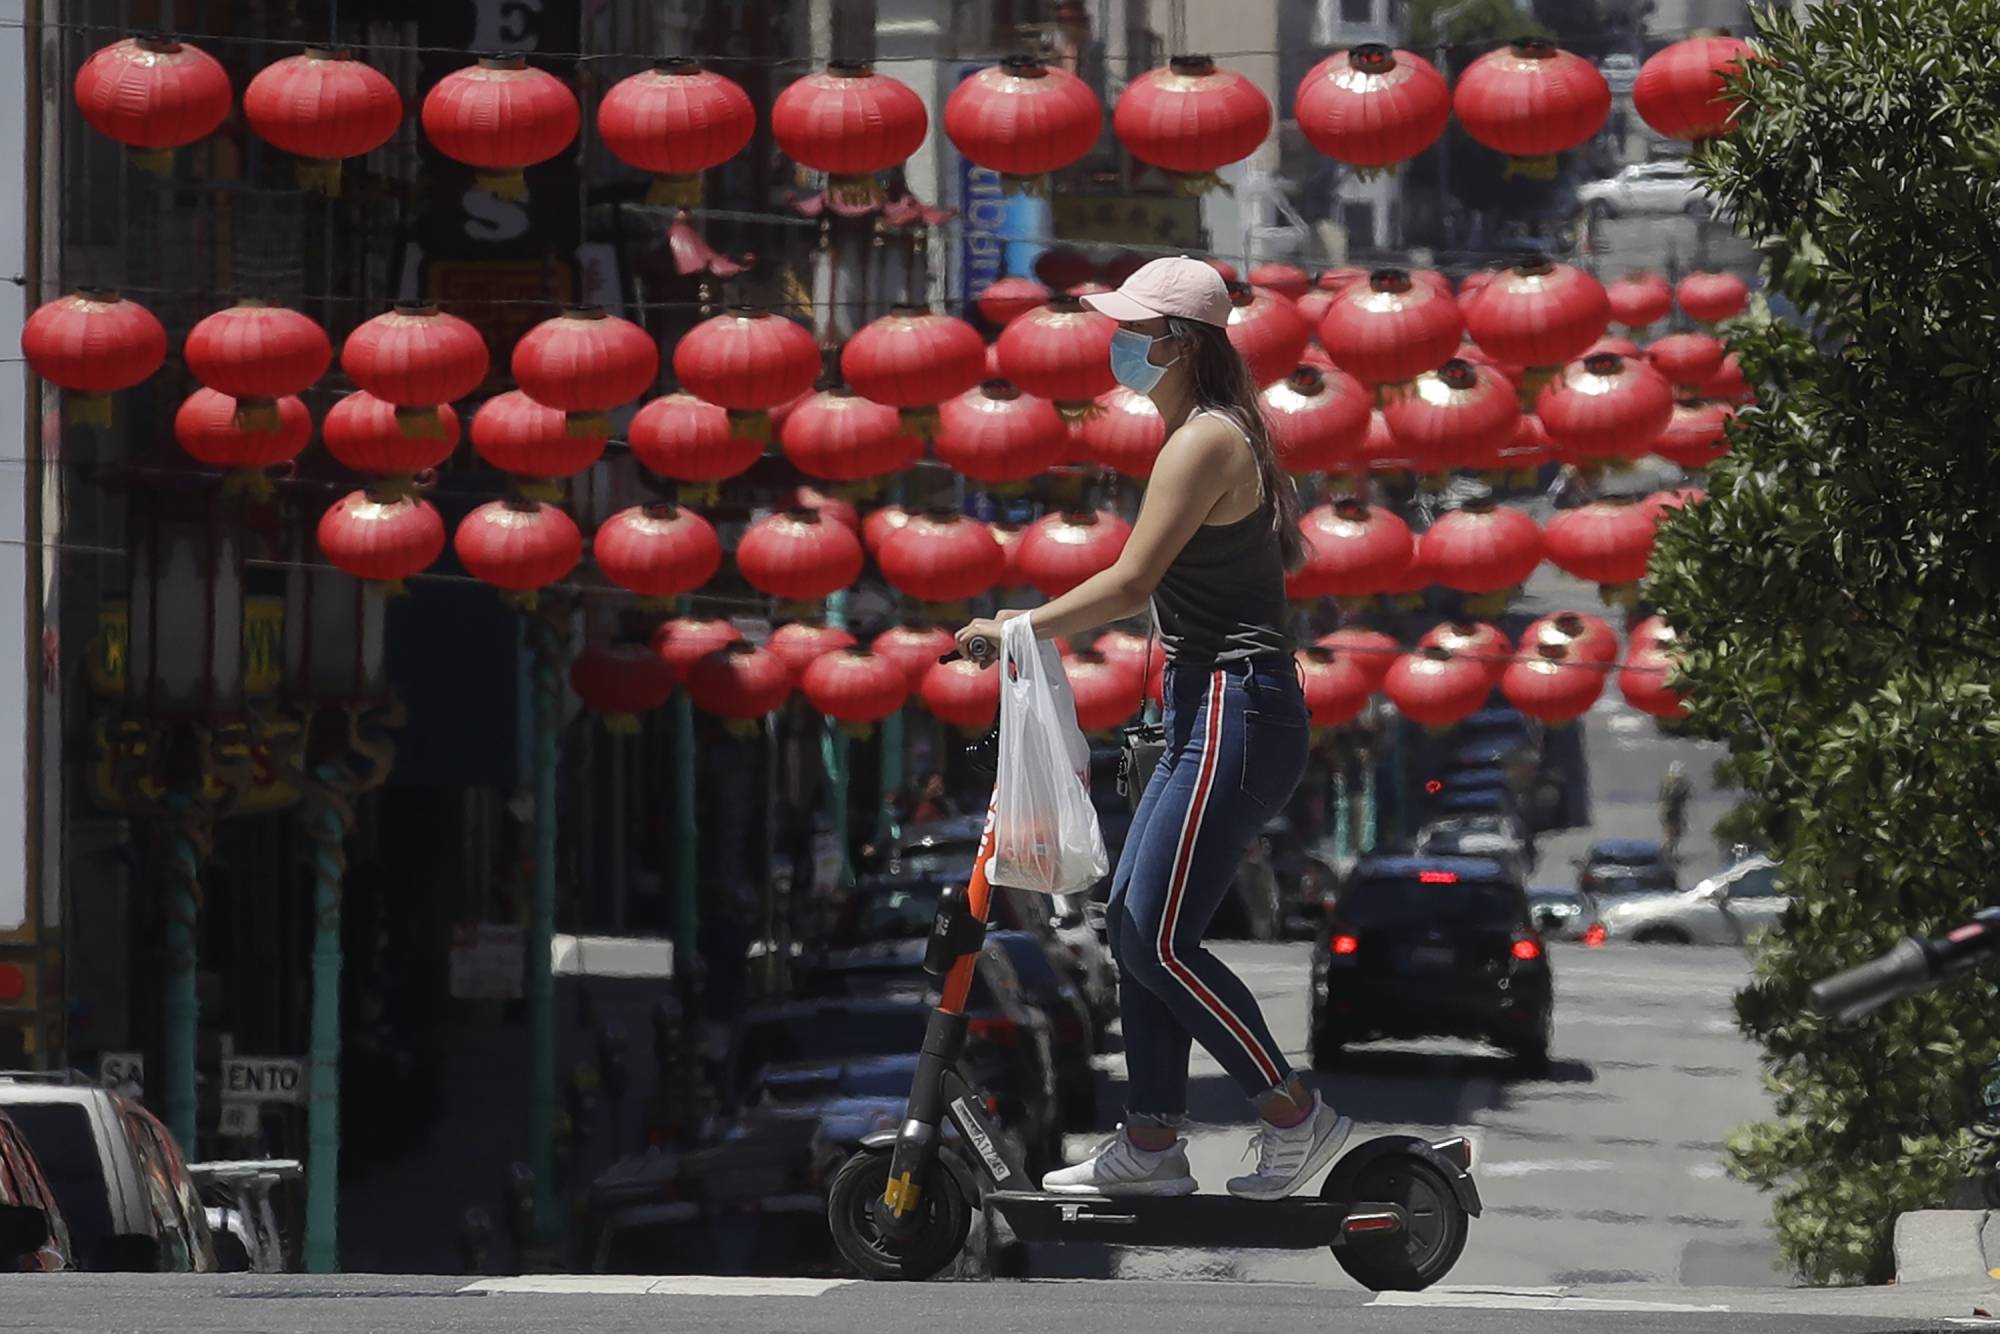 FILE - In this July 11, 2020, file photo, a woman wears a face mask while riding a scooter in front lanterns hanging in Chinatown during the coronavirus outbreak in San Francisco. In San Francisco, a city that depends largely on tourism, a nearly $11 billion loss in tourism spending is projected in 2020 and 2021 as the thousands of people who normally flock their for conventions and vacations have disappeared, according to the city's tourism bureau. (AP Photo/Jeff Chiu, File)